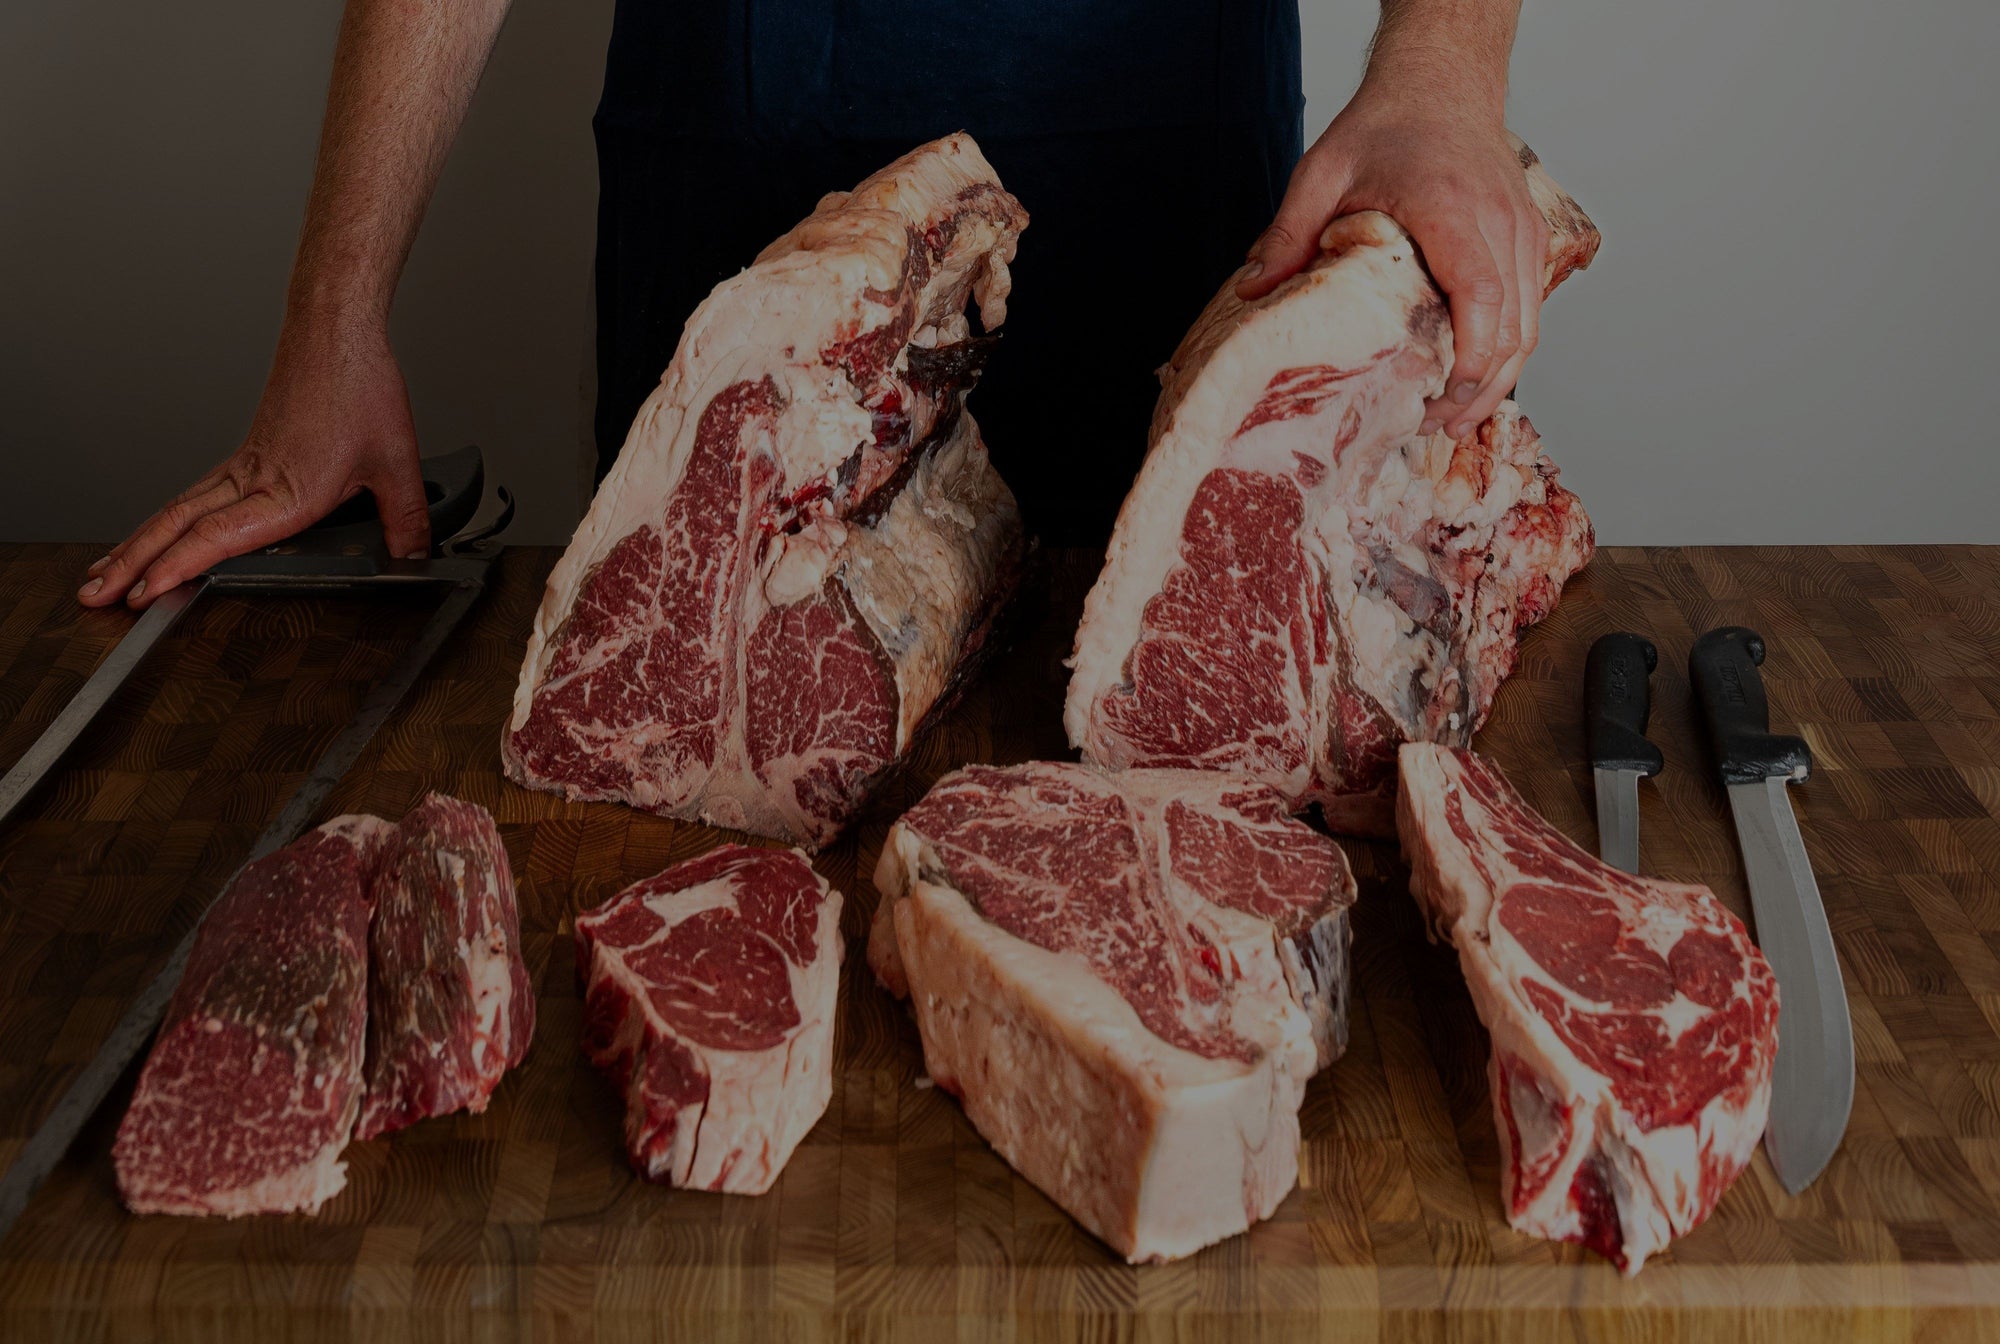 Sign up to hear butchery class updates